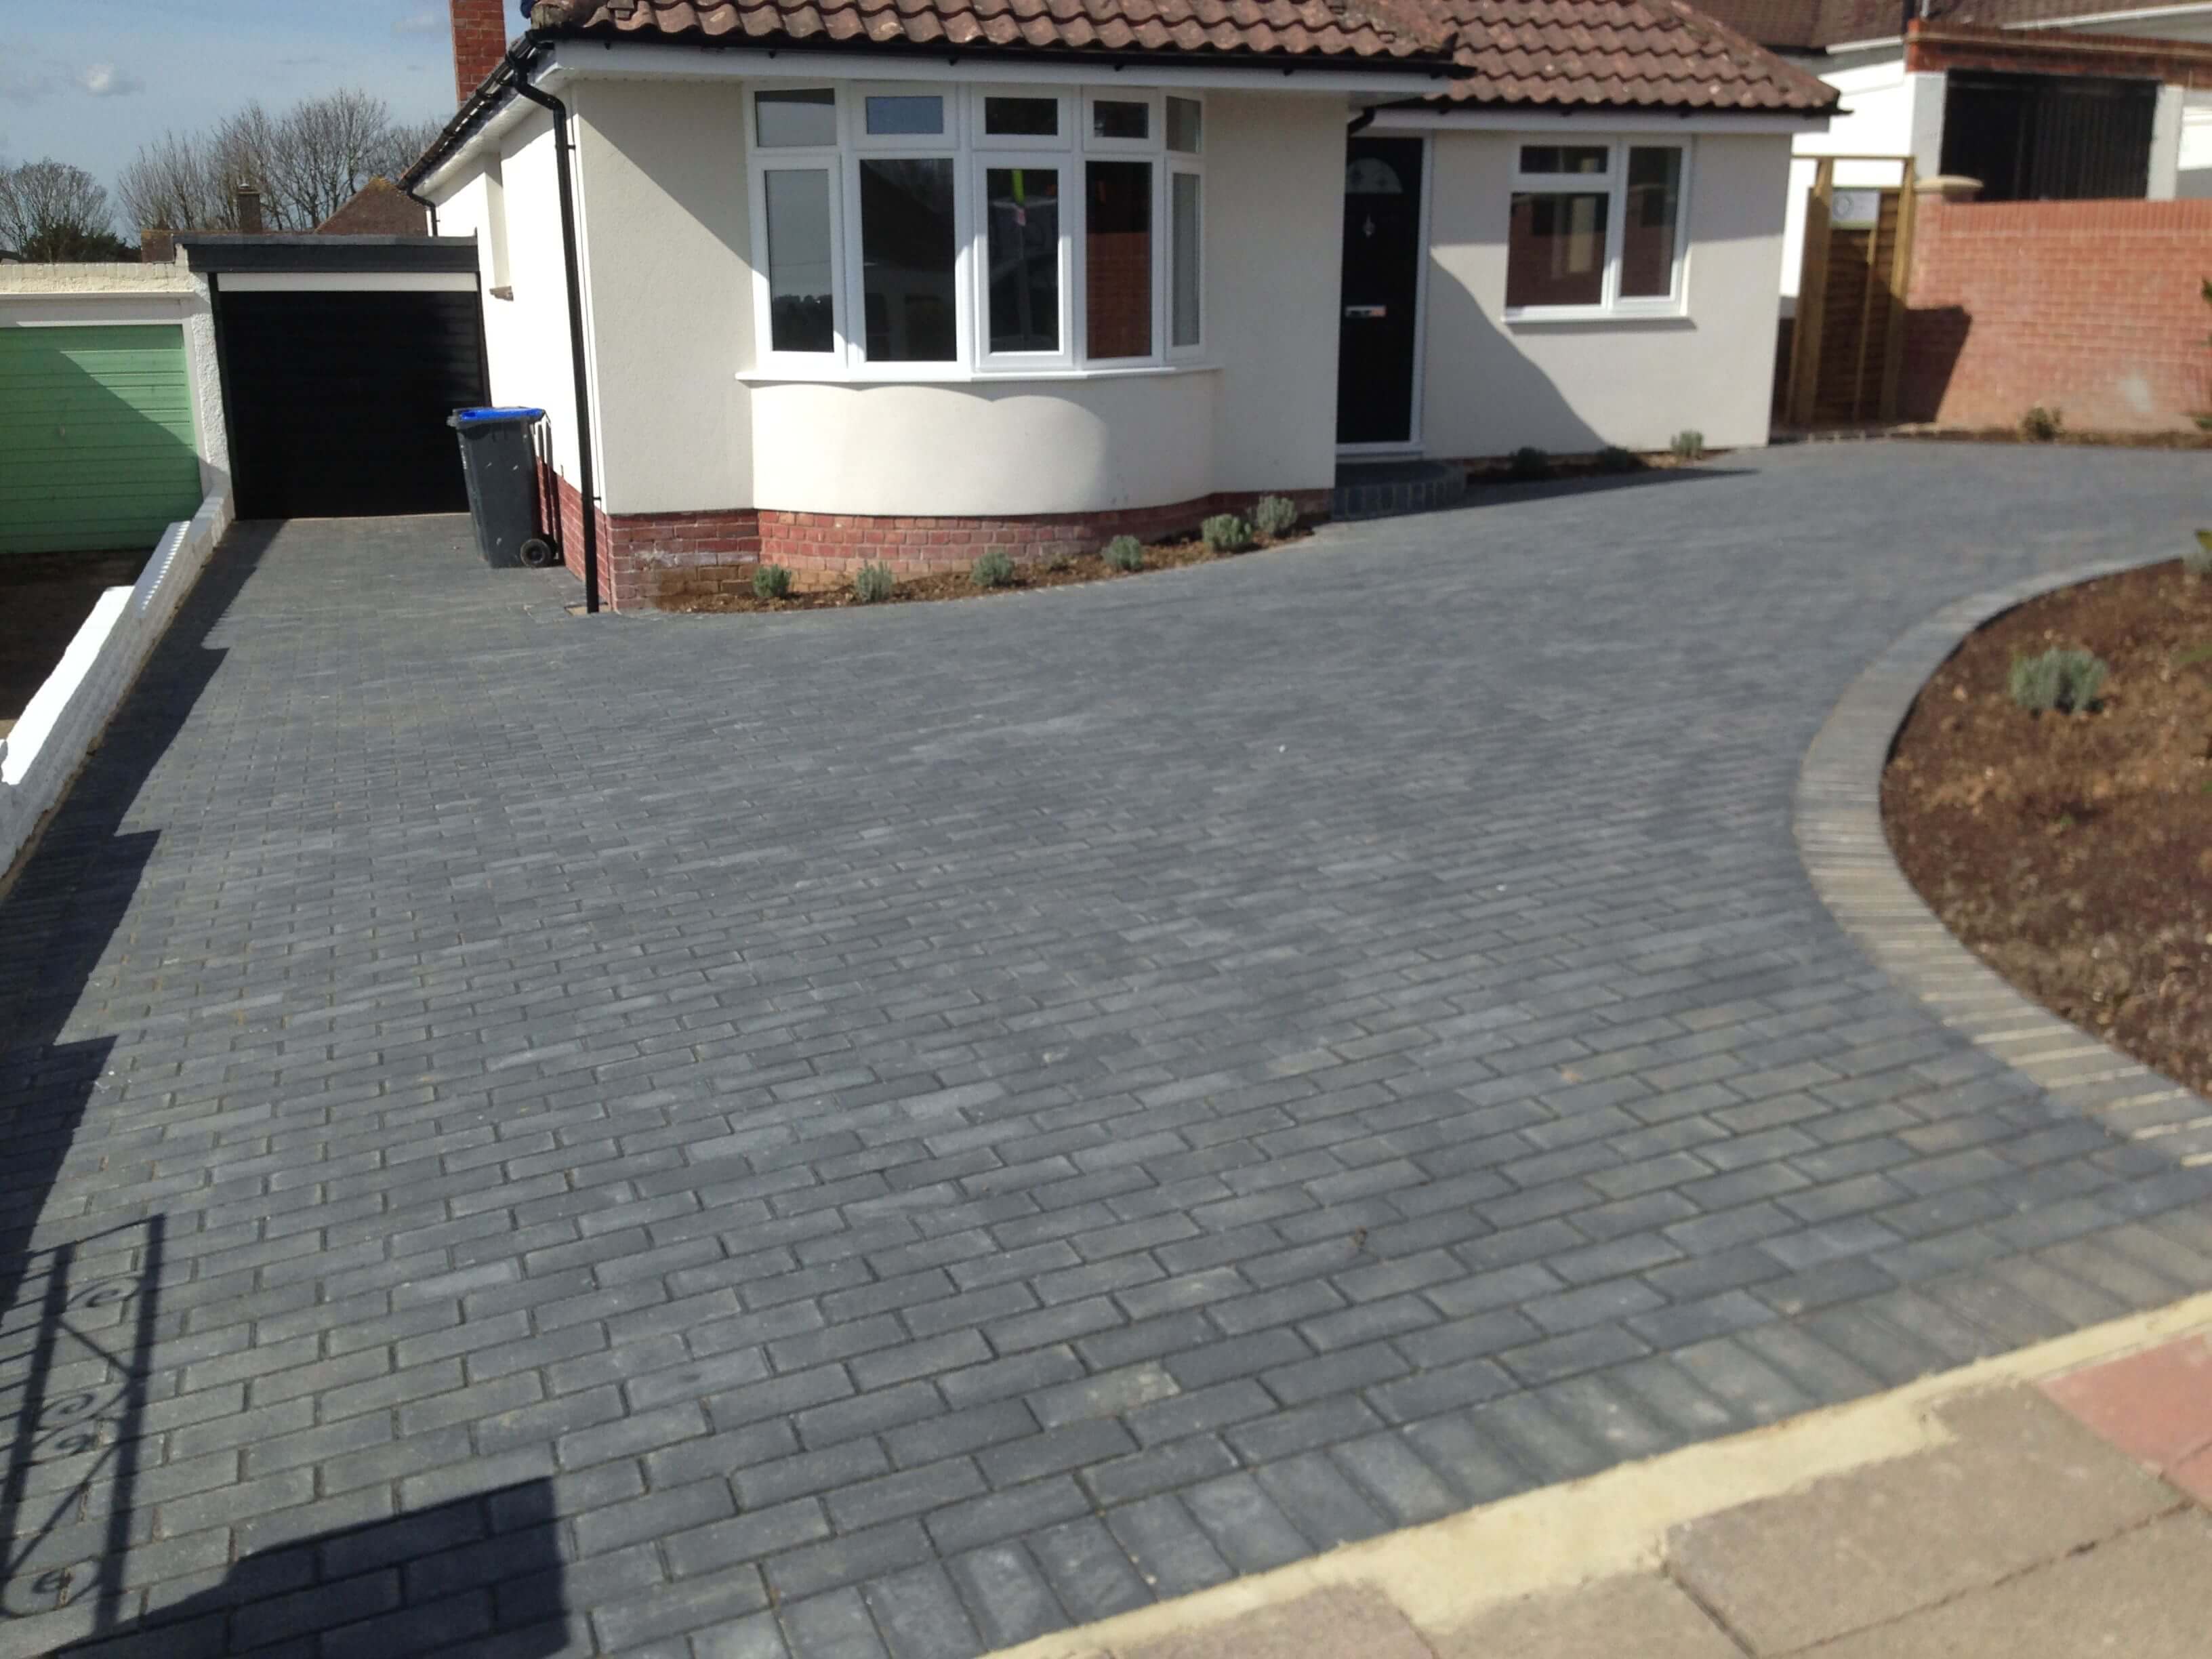 Class F - Driveways - hard surfaces incidental to the enjoyment of a dwellinghouse